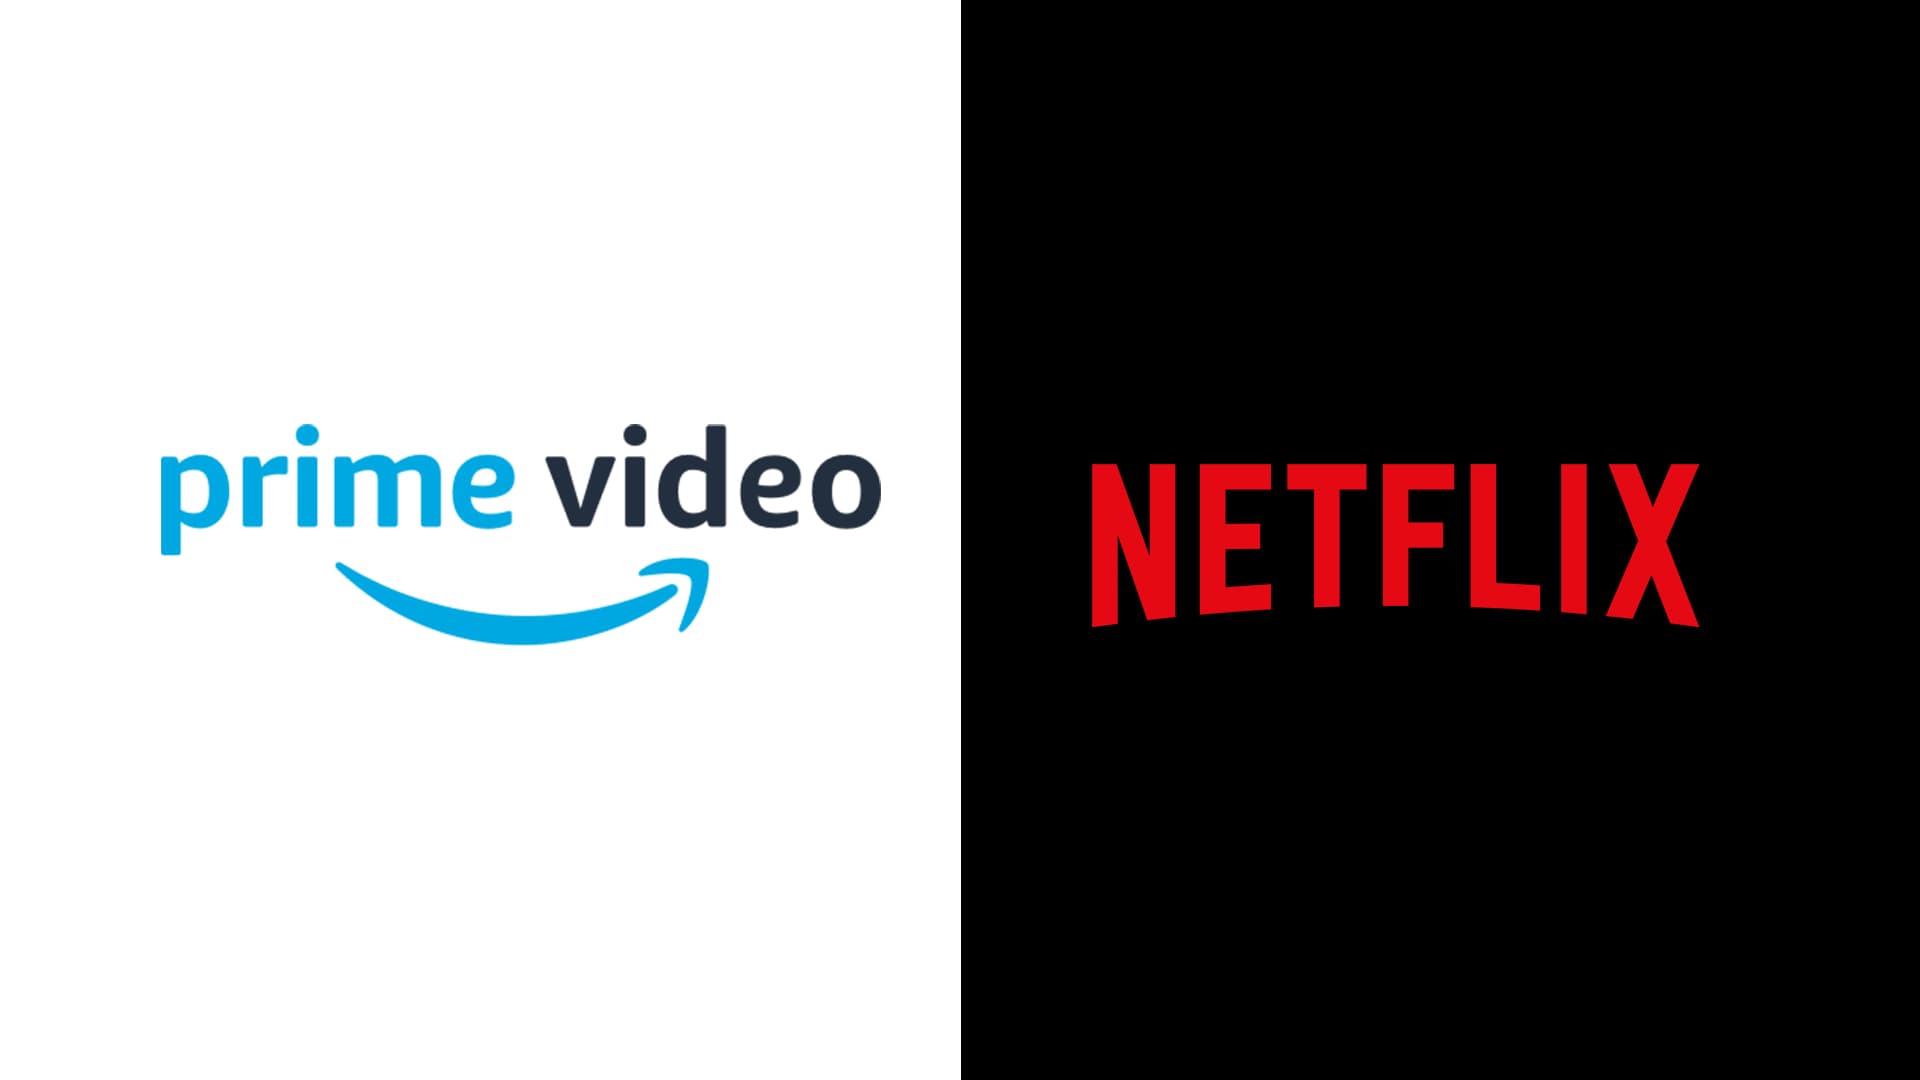 Get Netflix and Amazon Prime Web Series for FREE